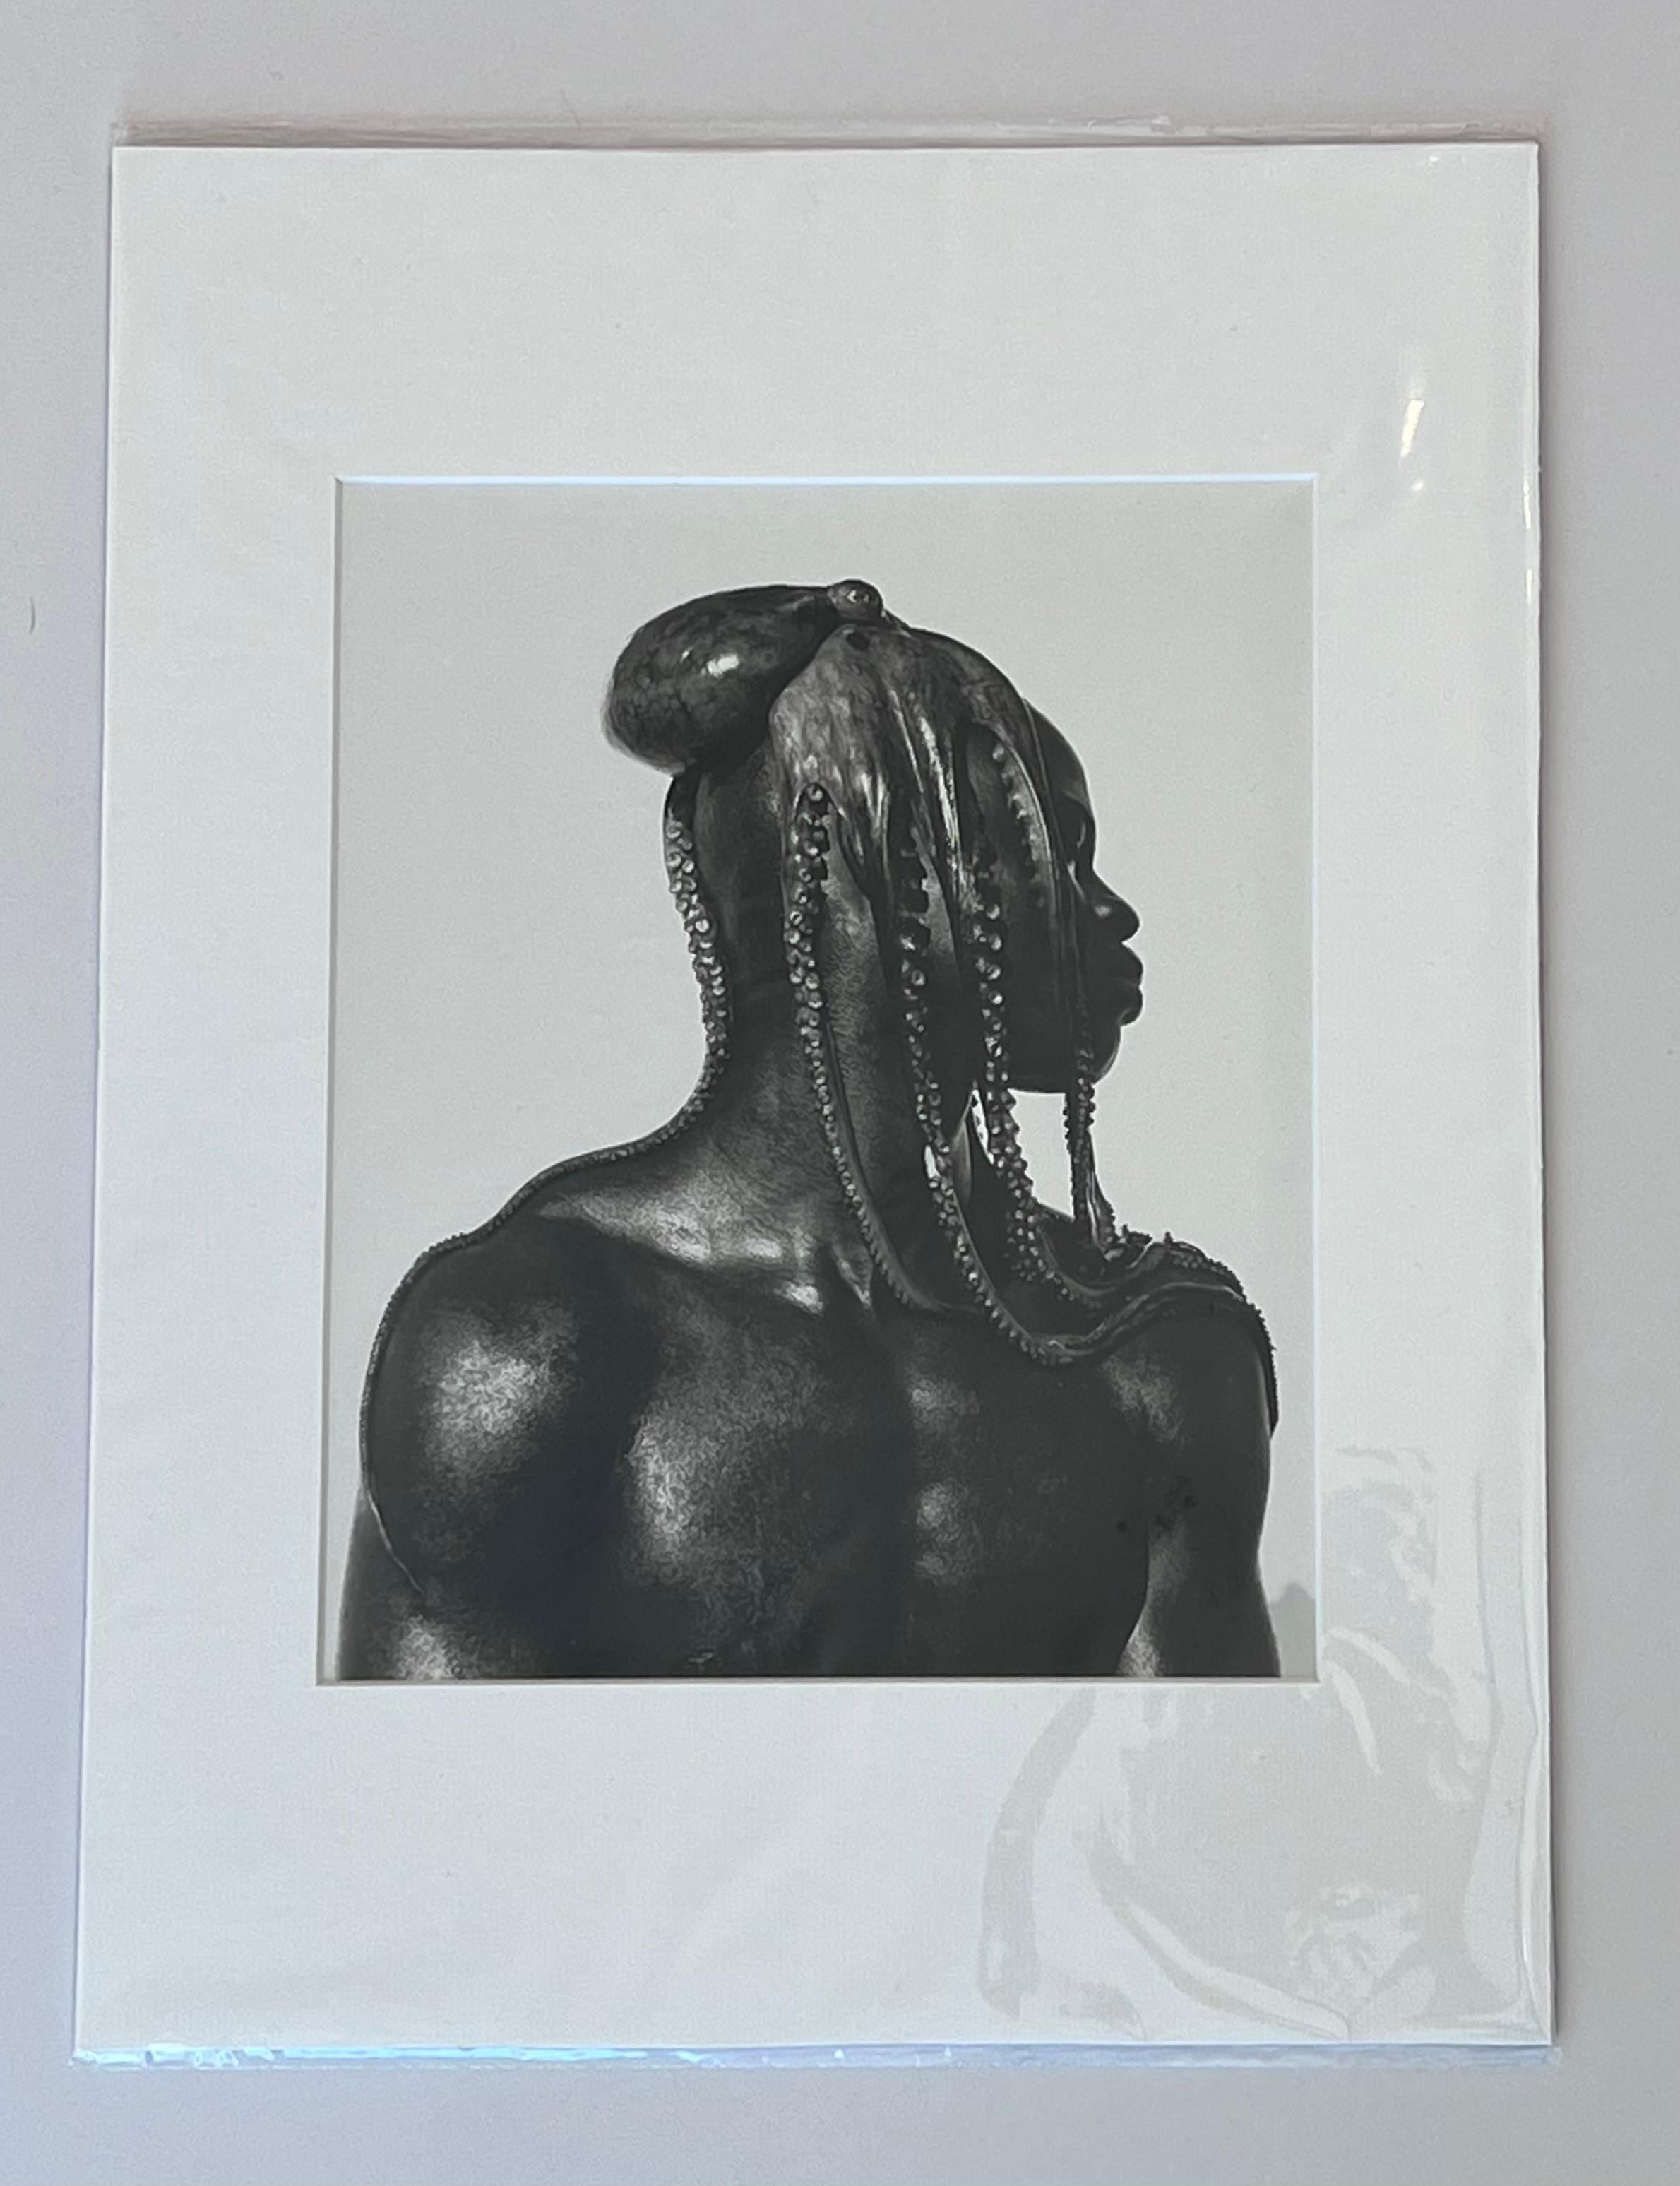 Dijmon with Octopus 1989
by Herb Ritts

A gorgeous black and white shot of actor and model Dijmon posing with an Octopus on his head. 

Unframed
Matted
Overall size : 12 x 16